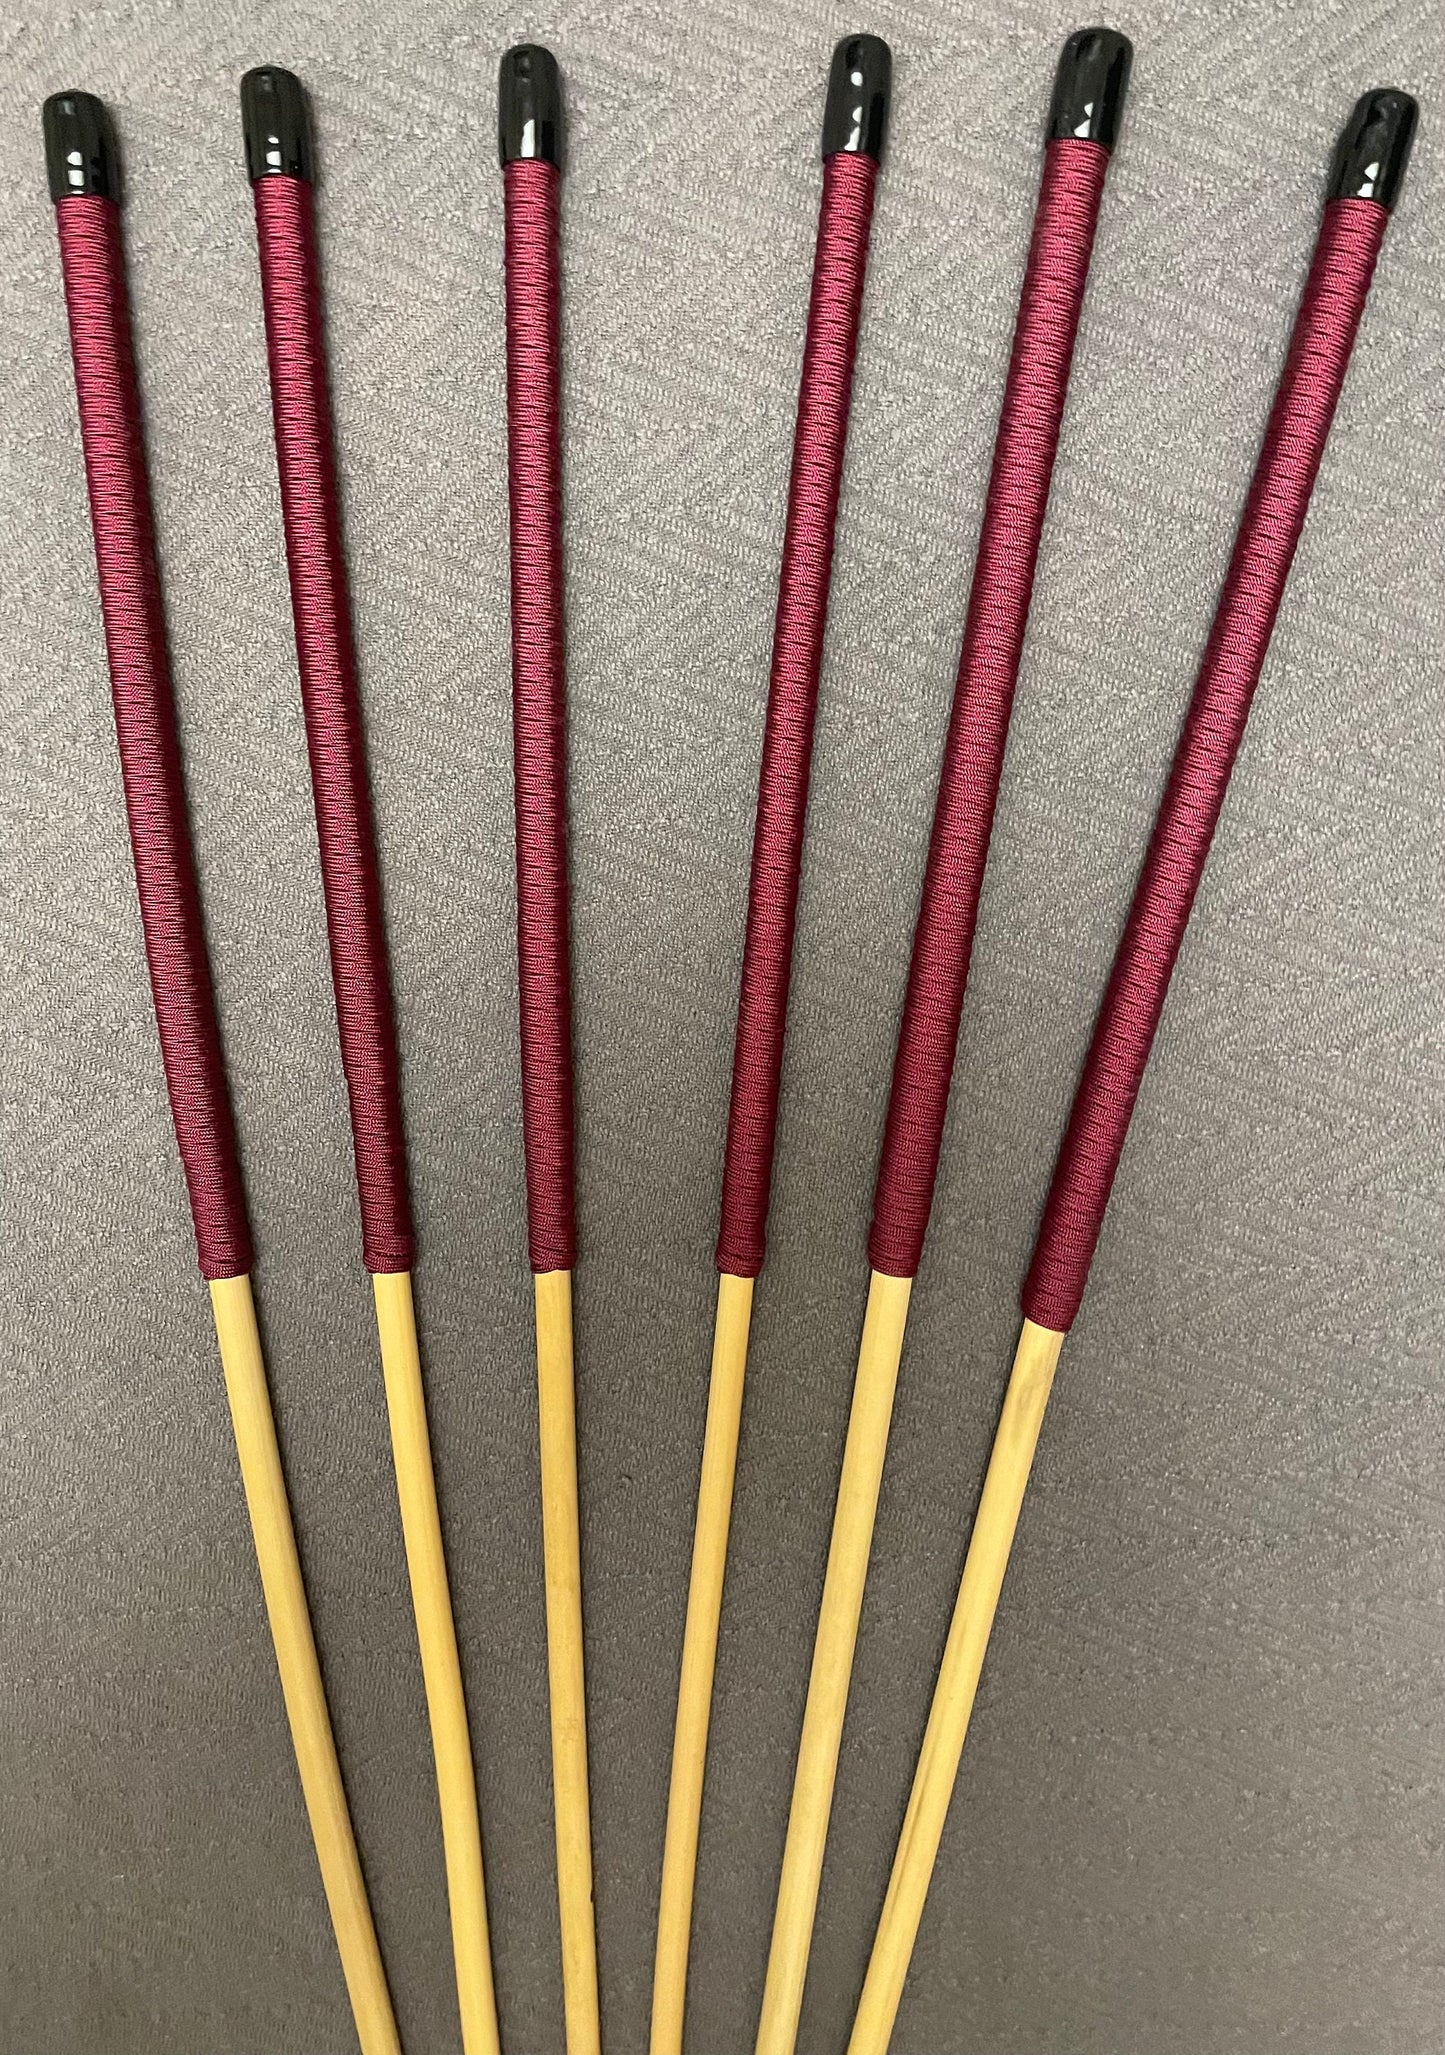 Knotless Dragon Canes / Ultimate Rattan Canes / No Knot Dragon Canes Set of 6 with Burgundy Paracord Handles 85 cms Length